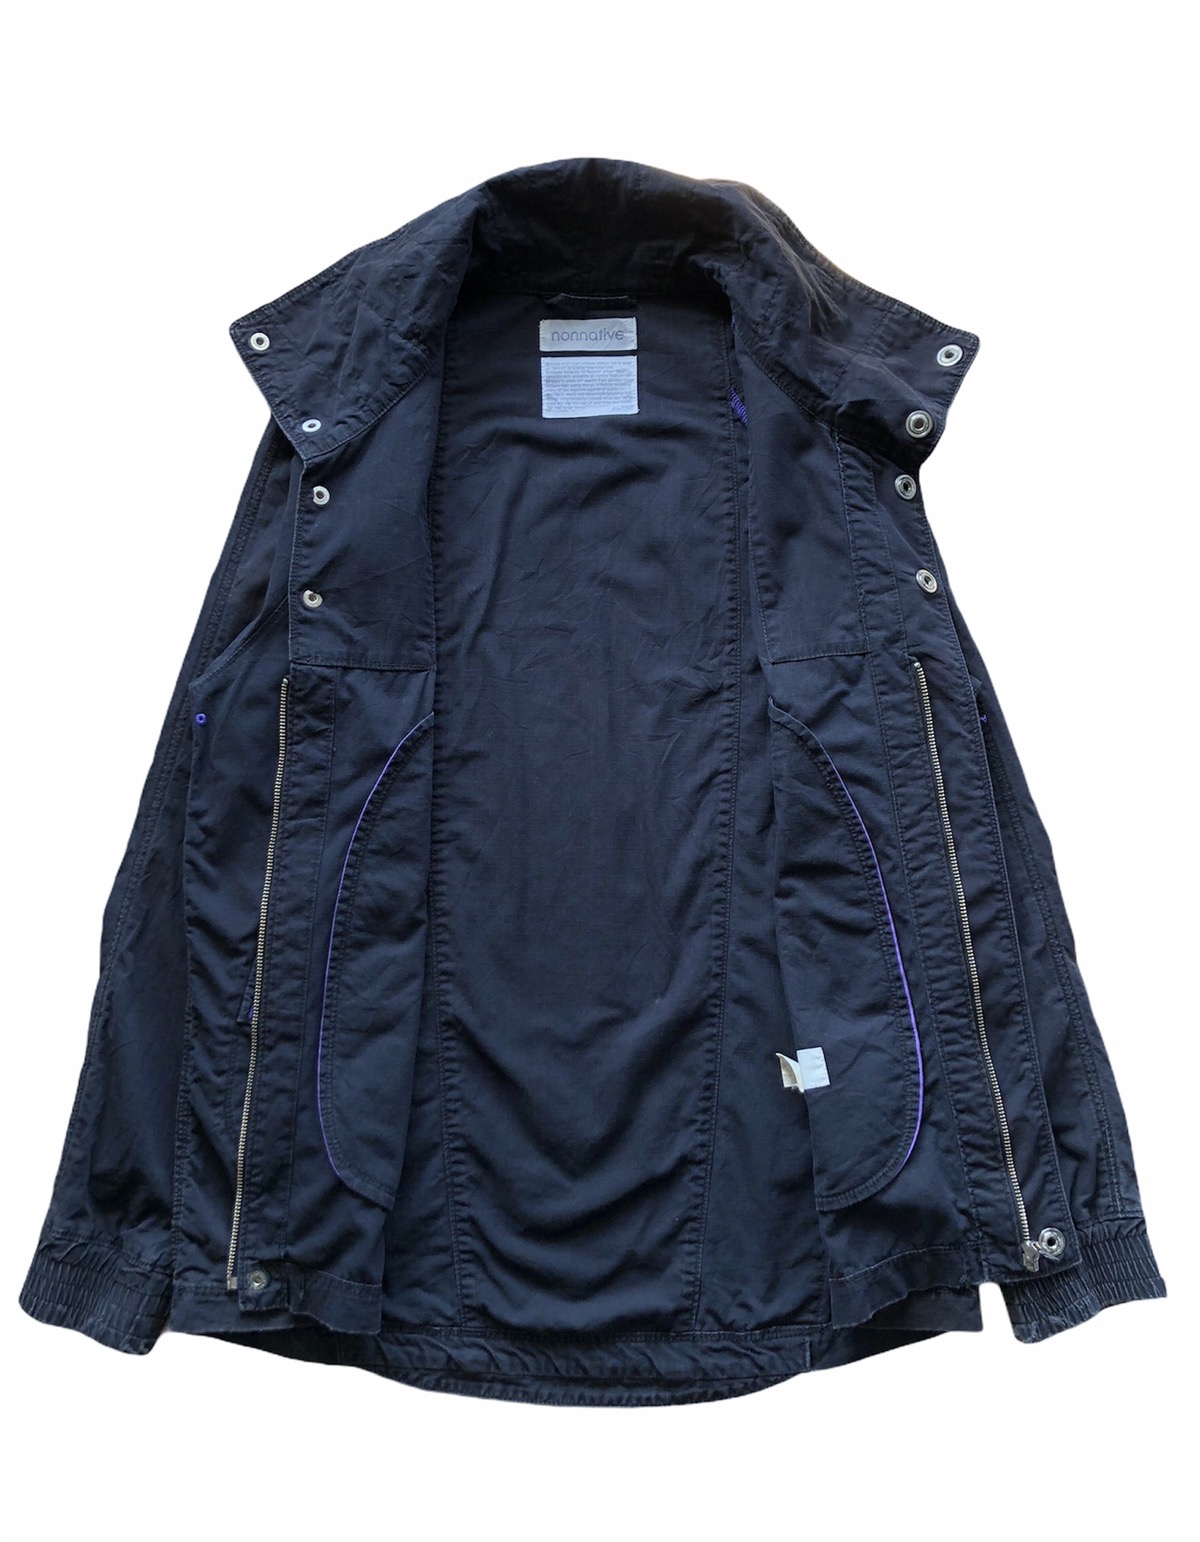 Military Style Cotton Ripstop Jacket - 3